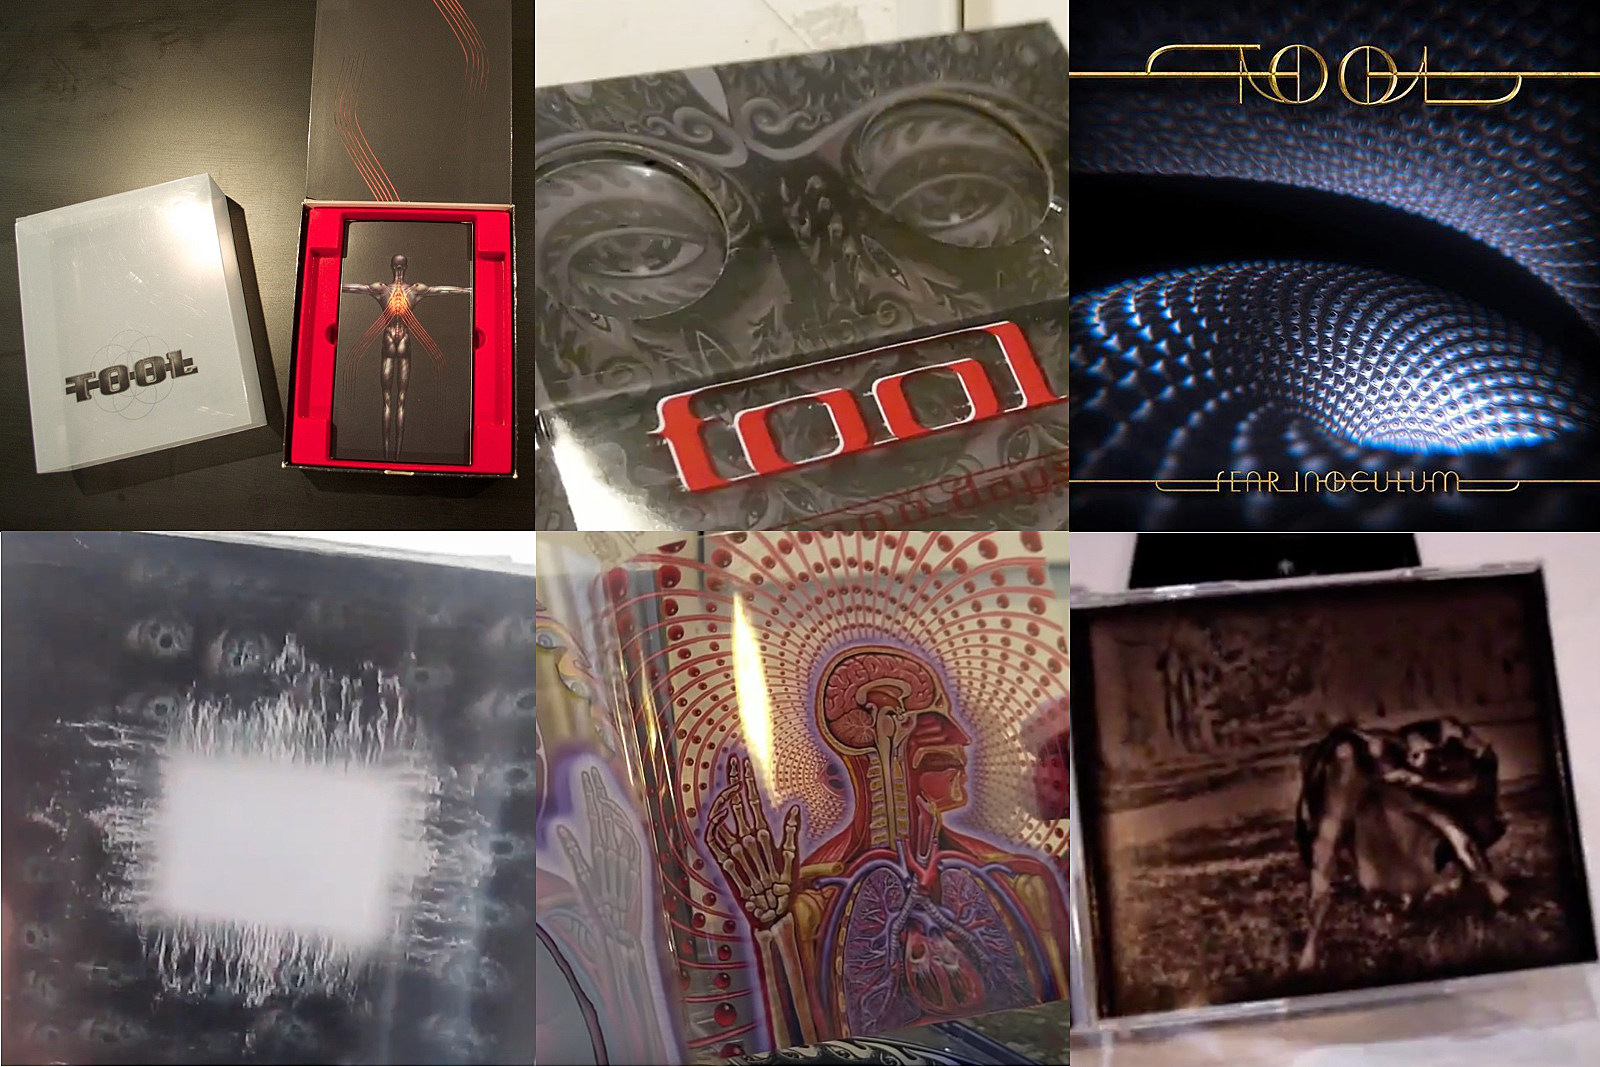 tool aenima album part talking about we are only an imagination of ourselves